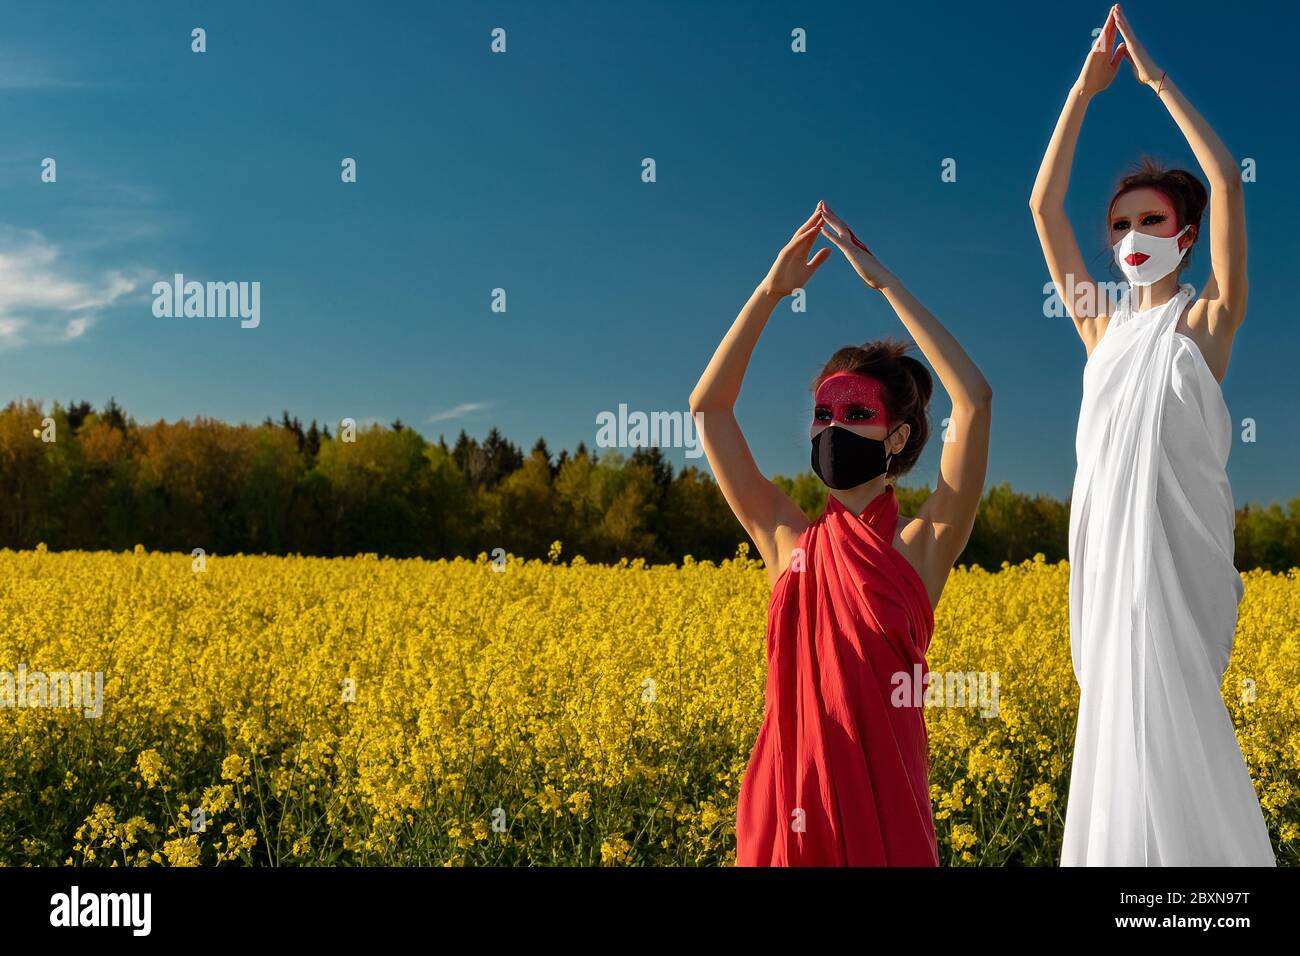 Two beautiful young brunette girls with creative bright makeup in tunics on a background of a field of yellow flowers and blue sky. One girl in a mask Stock Photo